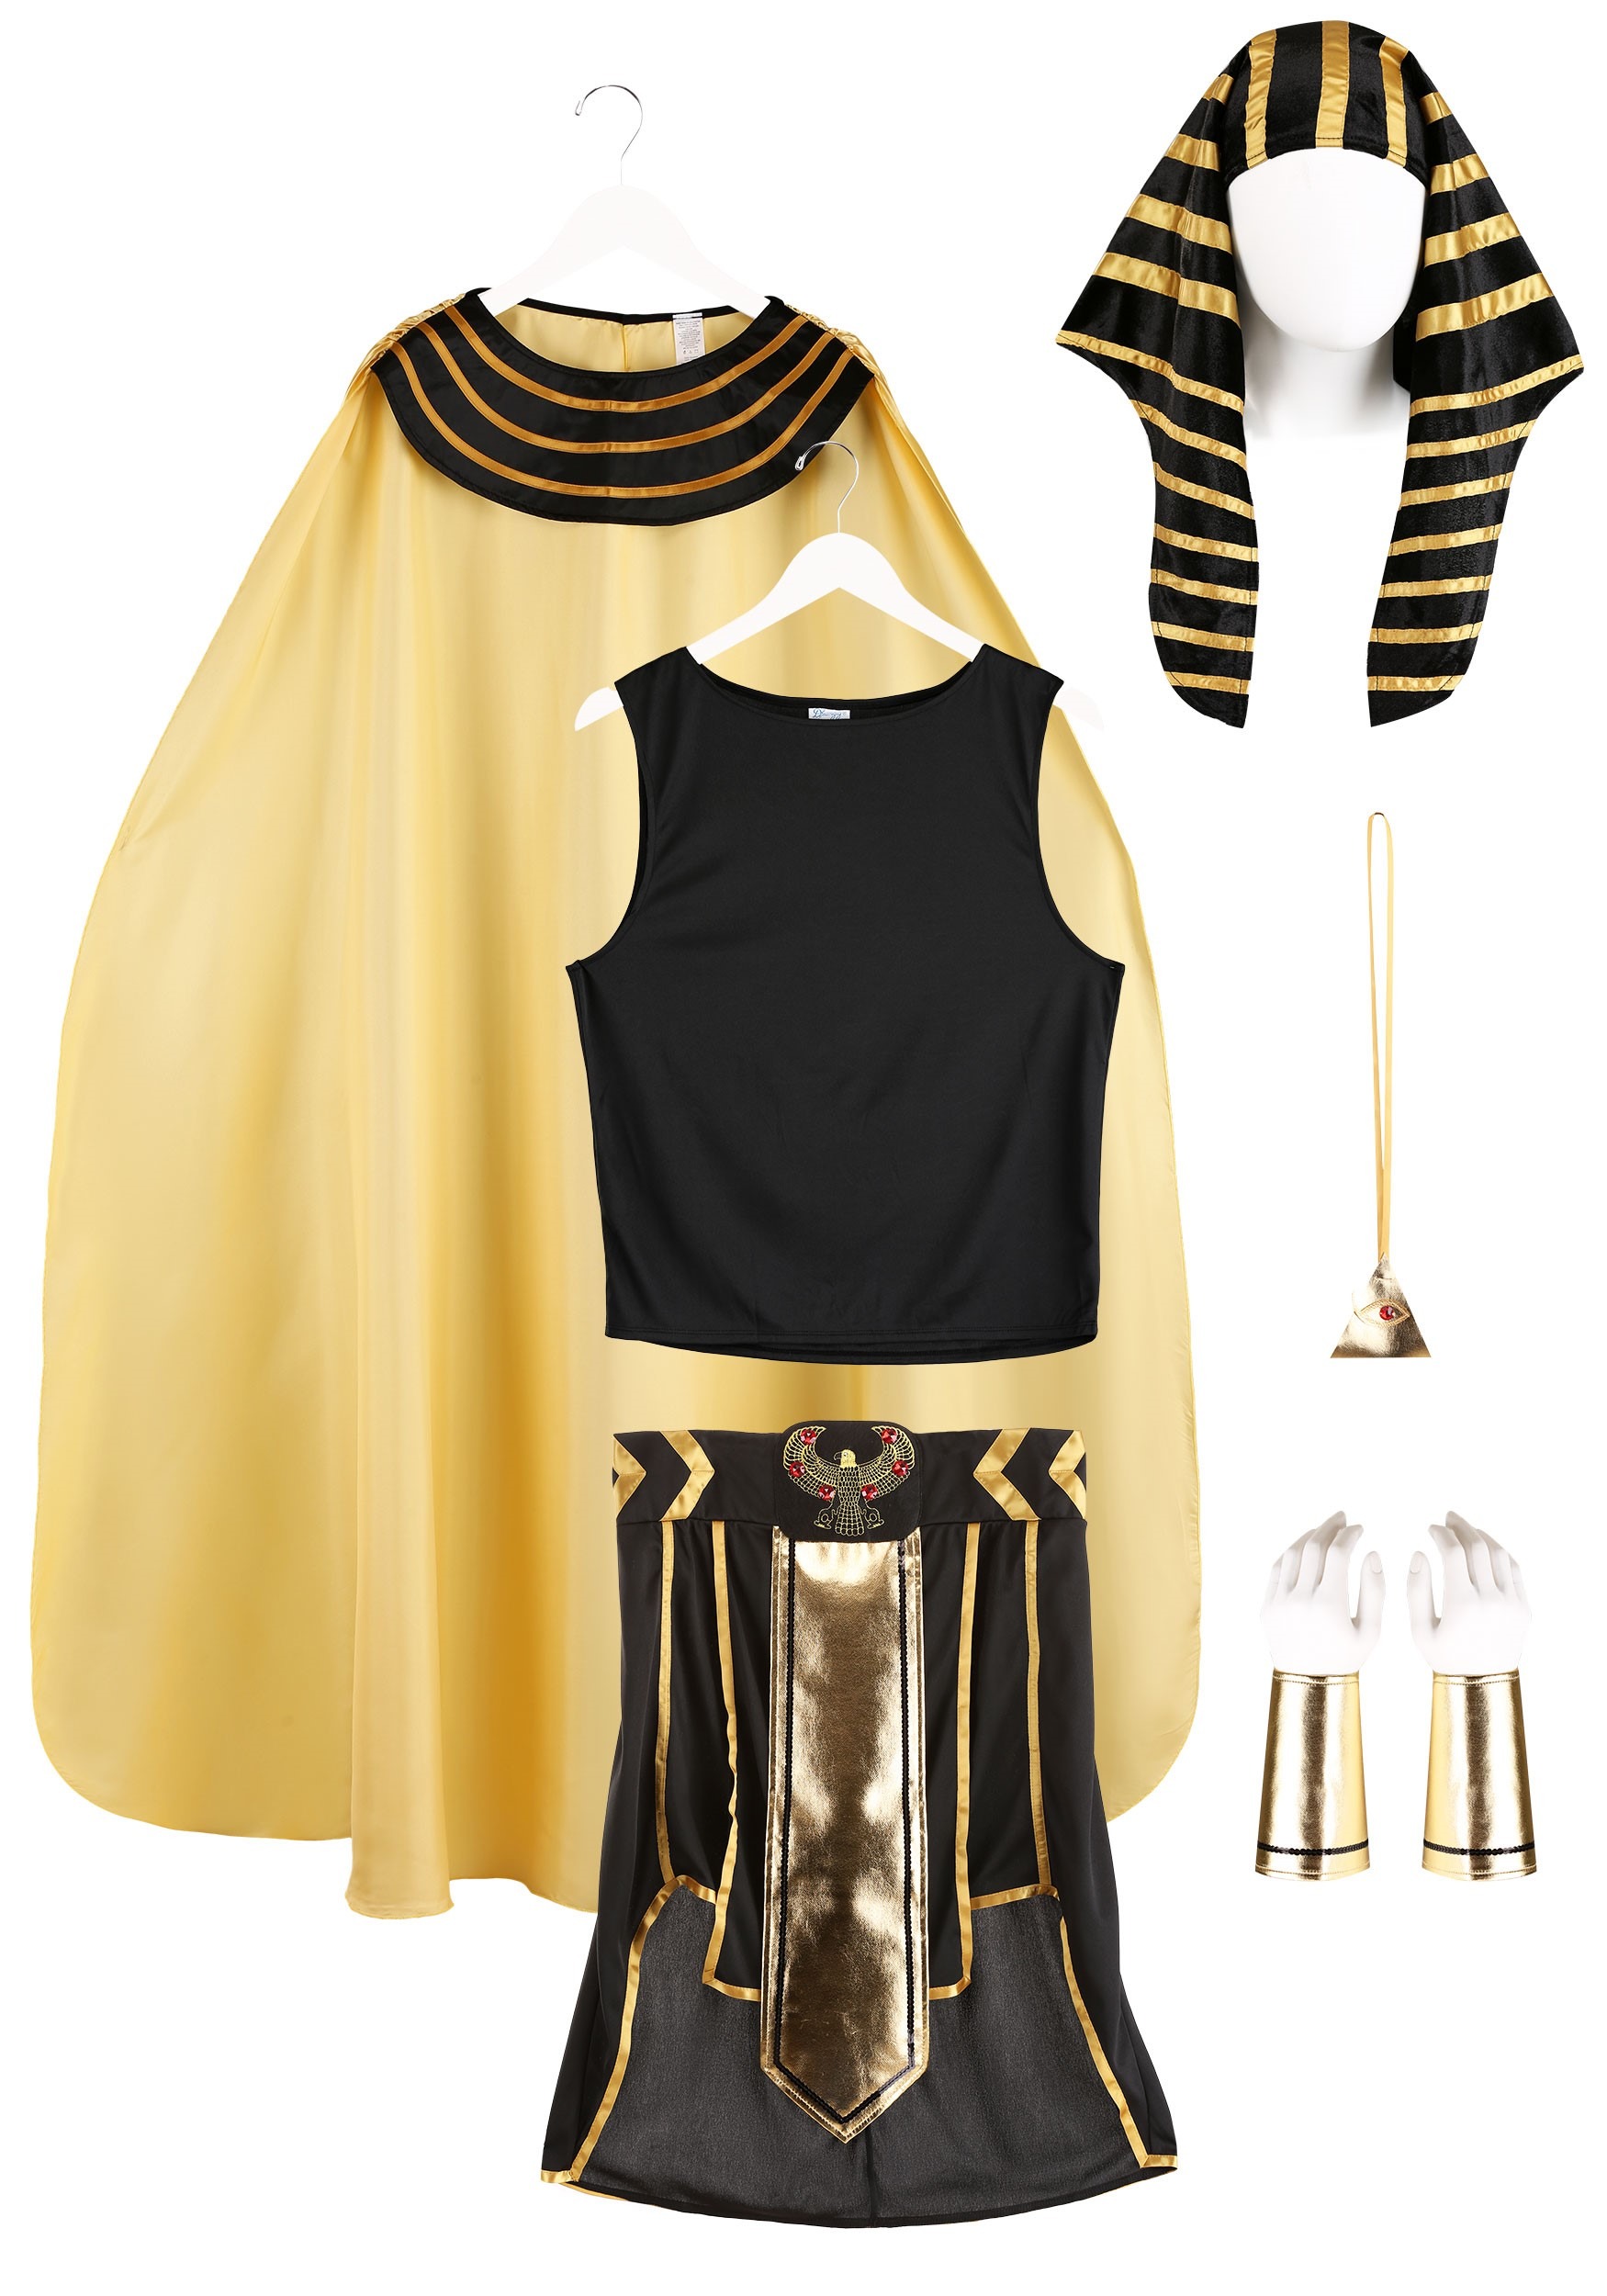 Plus Size King Of Egypt Costume For An Adult Egyptian Costume